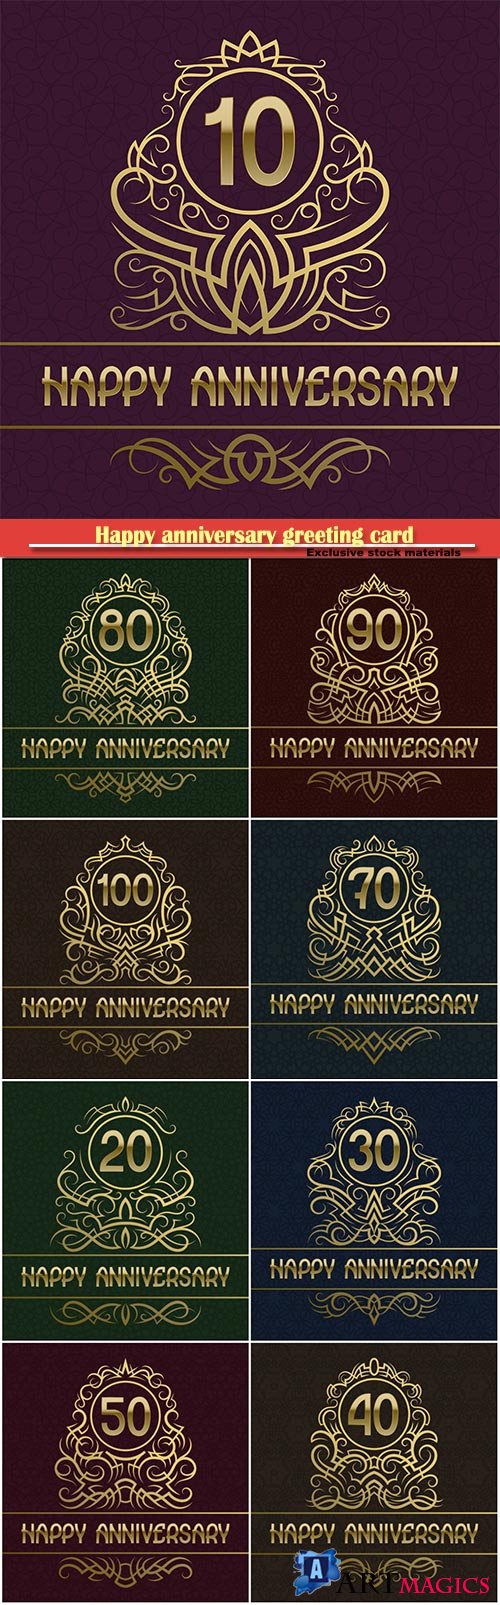 Happy anniversary greeting card with vintage design golden elements